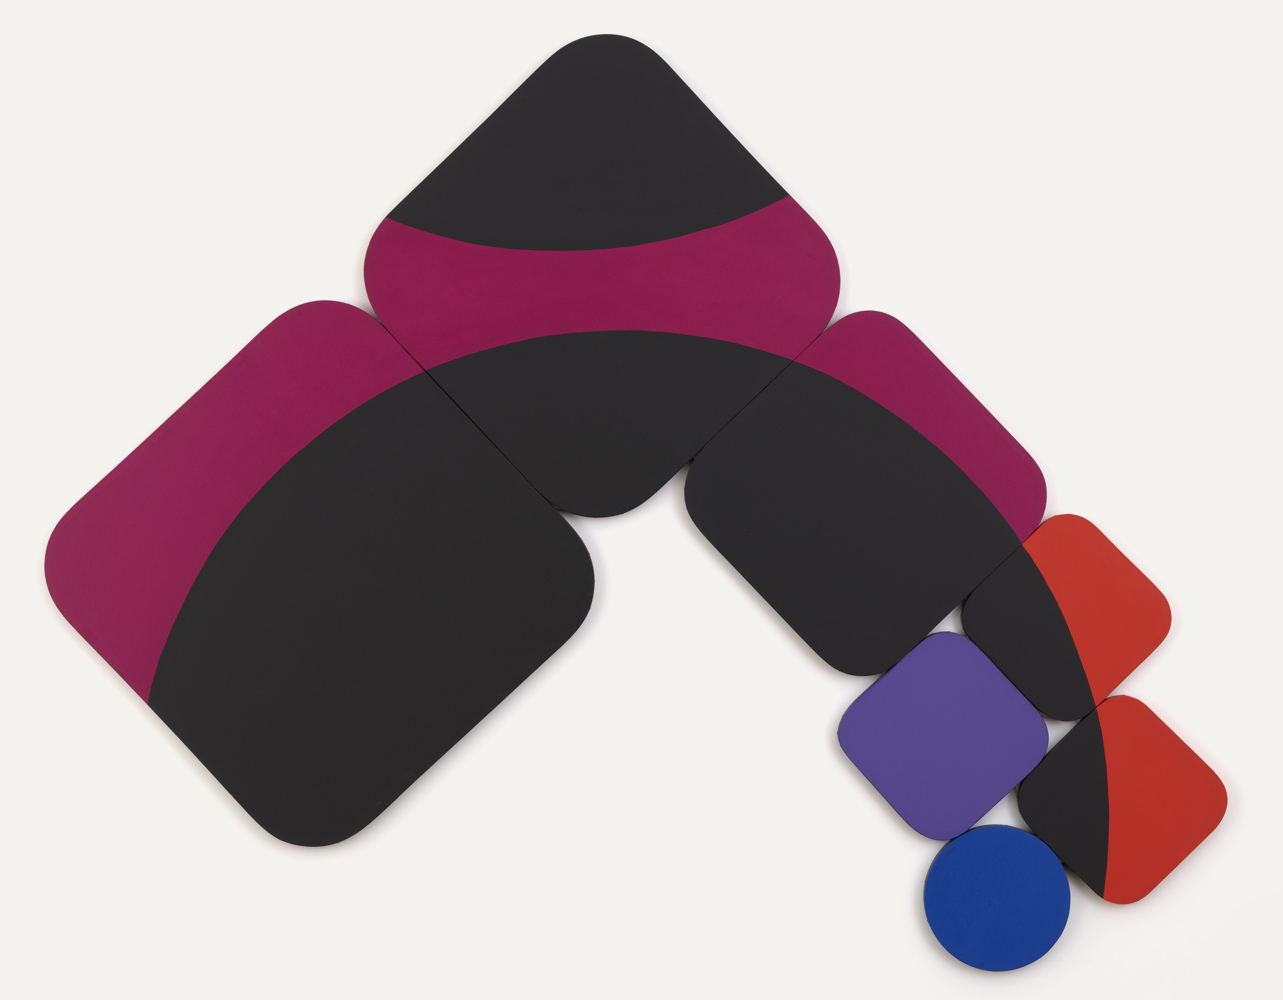 Many rounded square canvases of different sizes arranged to make a swooping shape defined further by a large black circle painted on the canvases which follows the arc of the canvases.  Beside the black is a fuchsia background which transitions to a brighter red at the bottom edge.  Also at the bottom edge are a purple rounded square, and a single circular 'accent' canvas, in a primary blue.